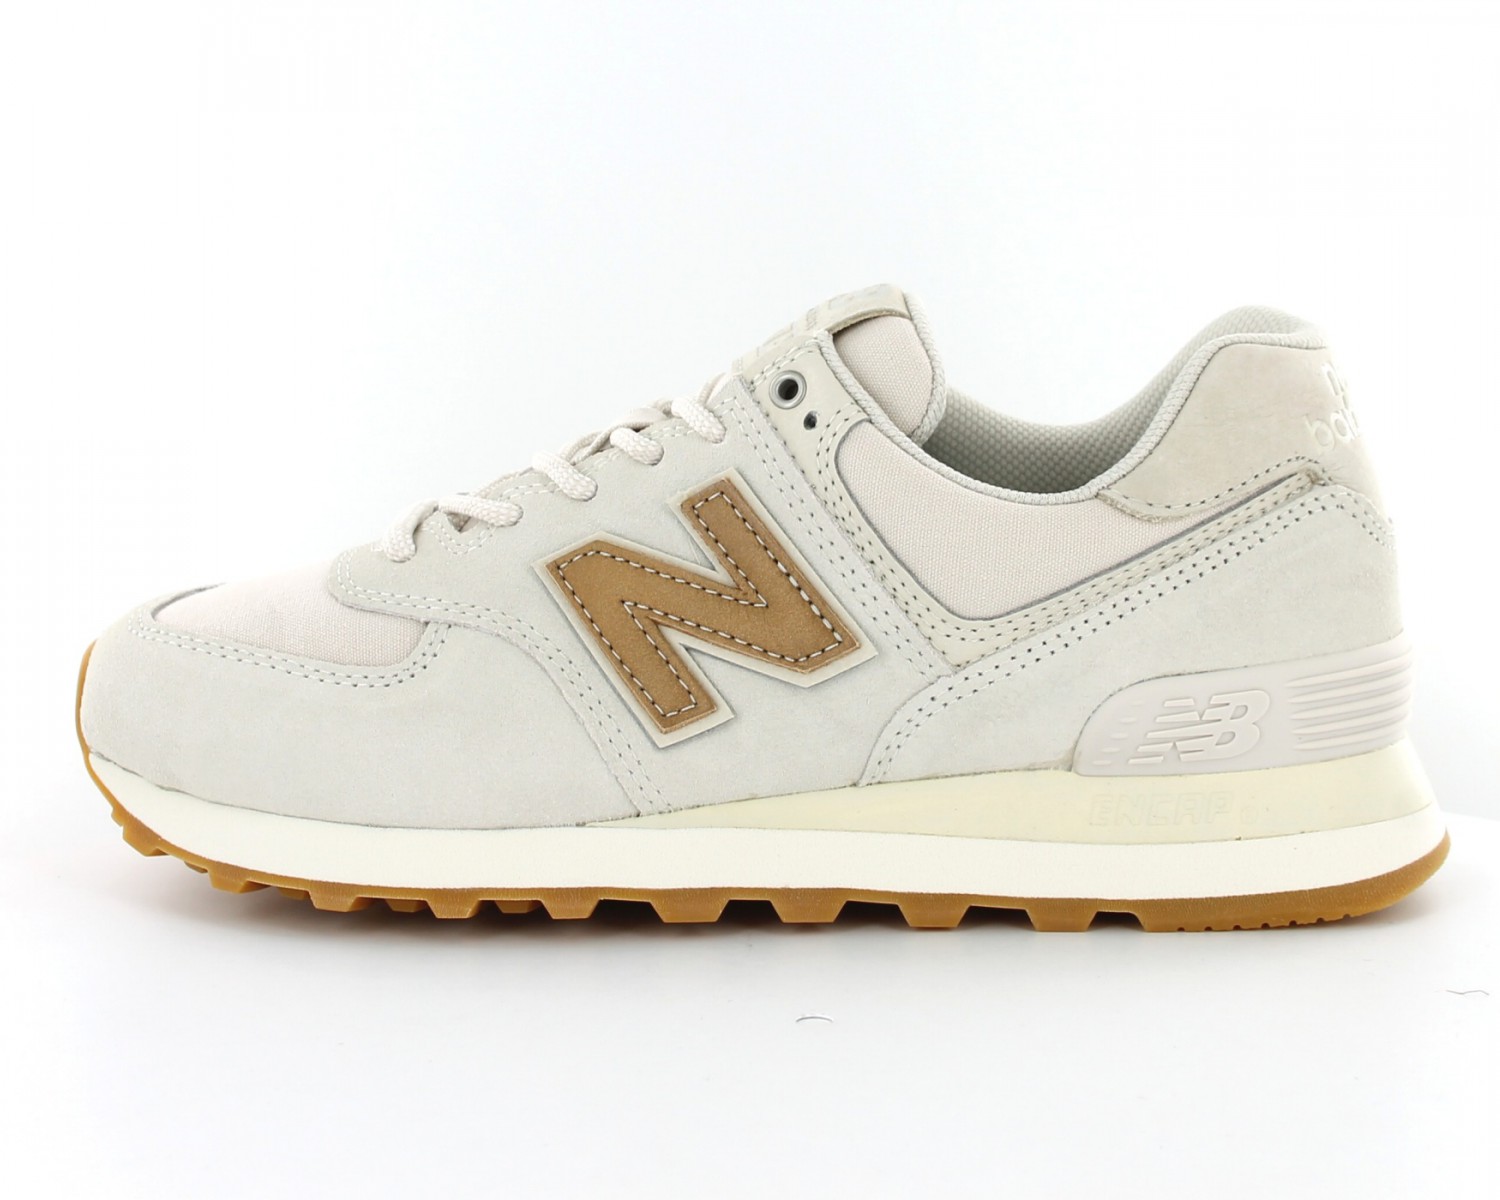 Devour Diacritical Recycle New Balance 574 Femme Suede Beige-Beige-Or WL574CLS